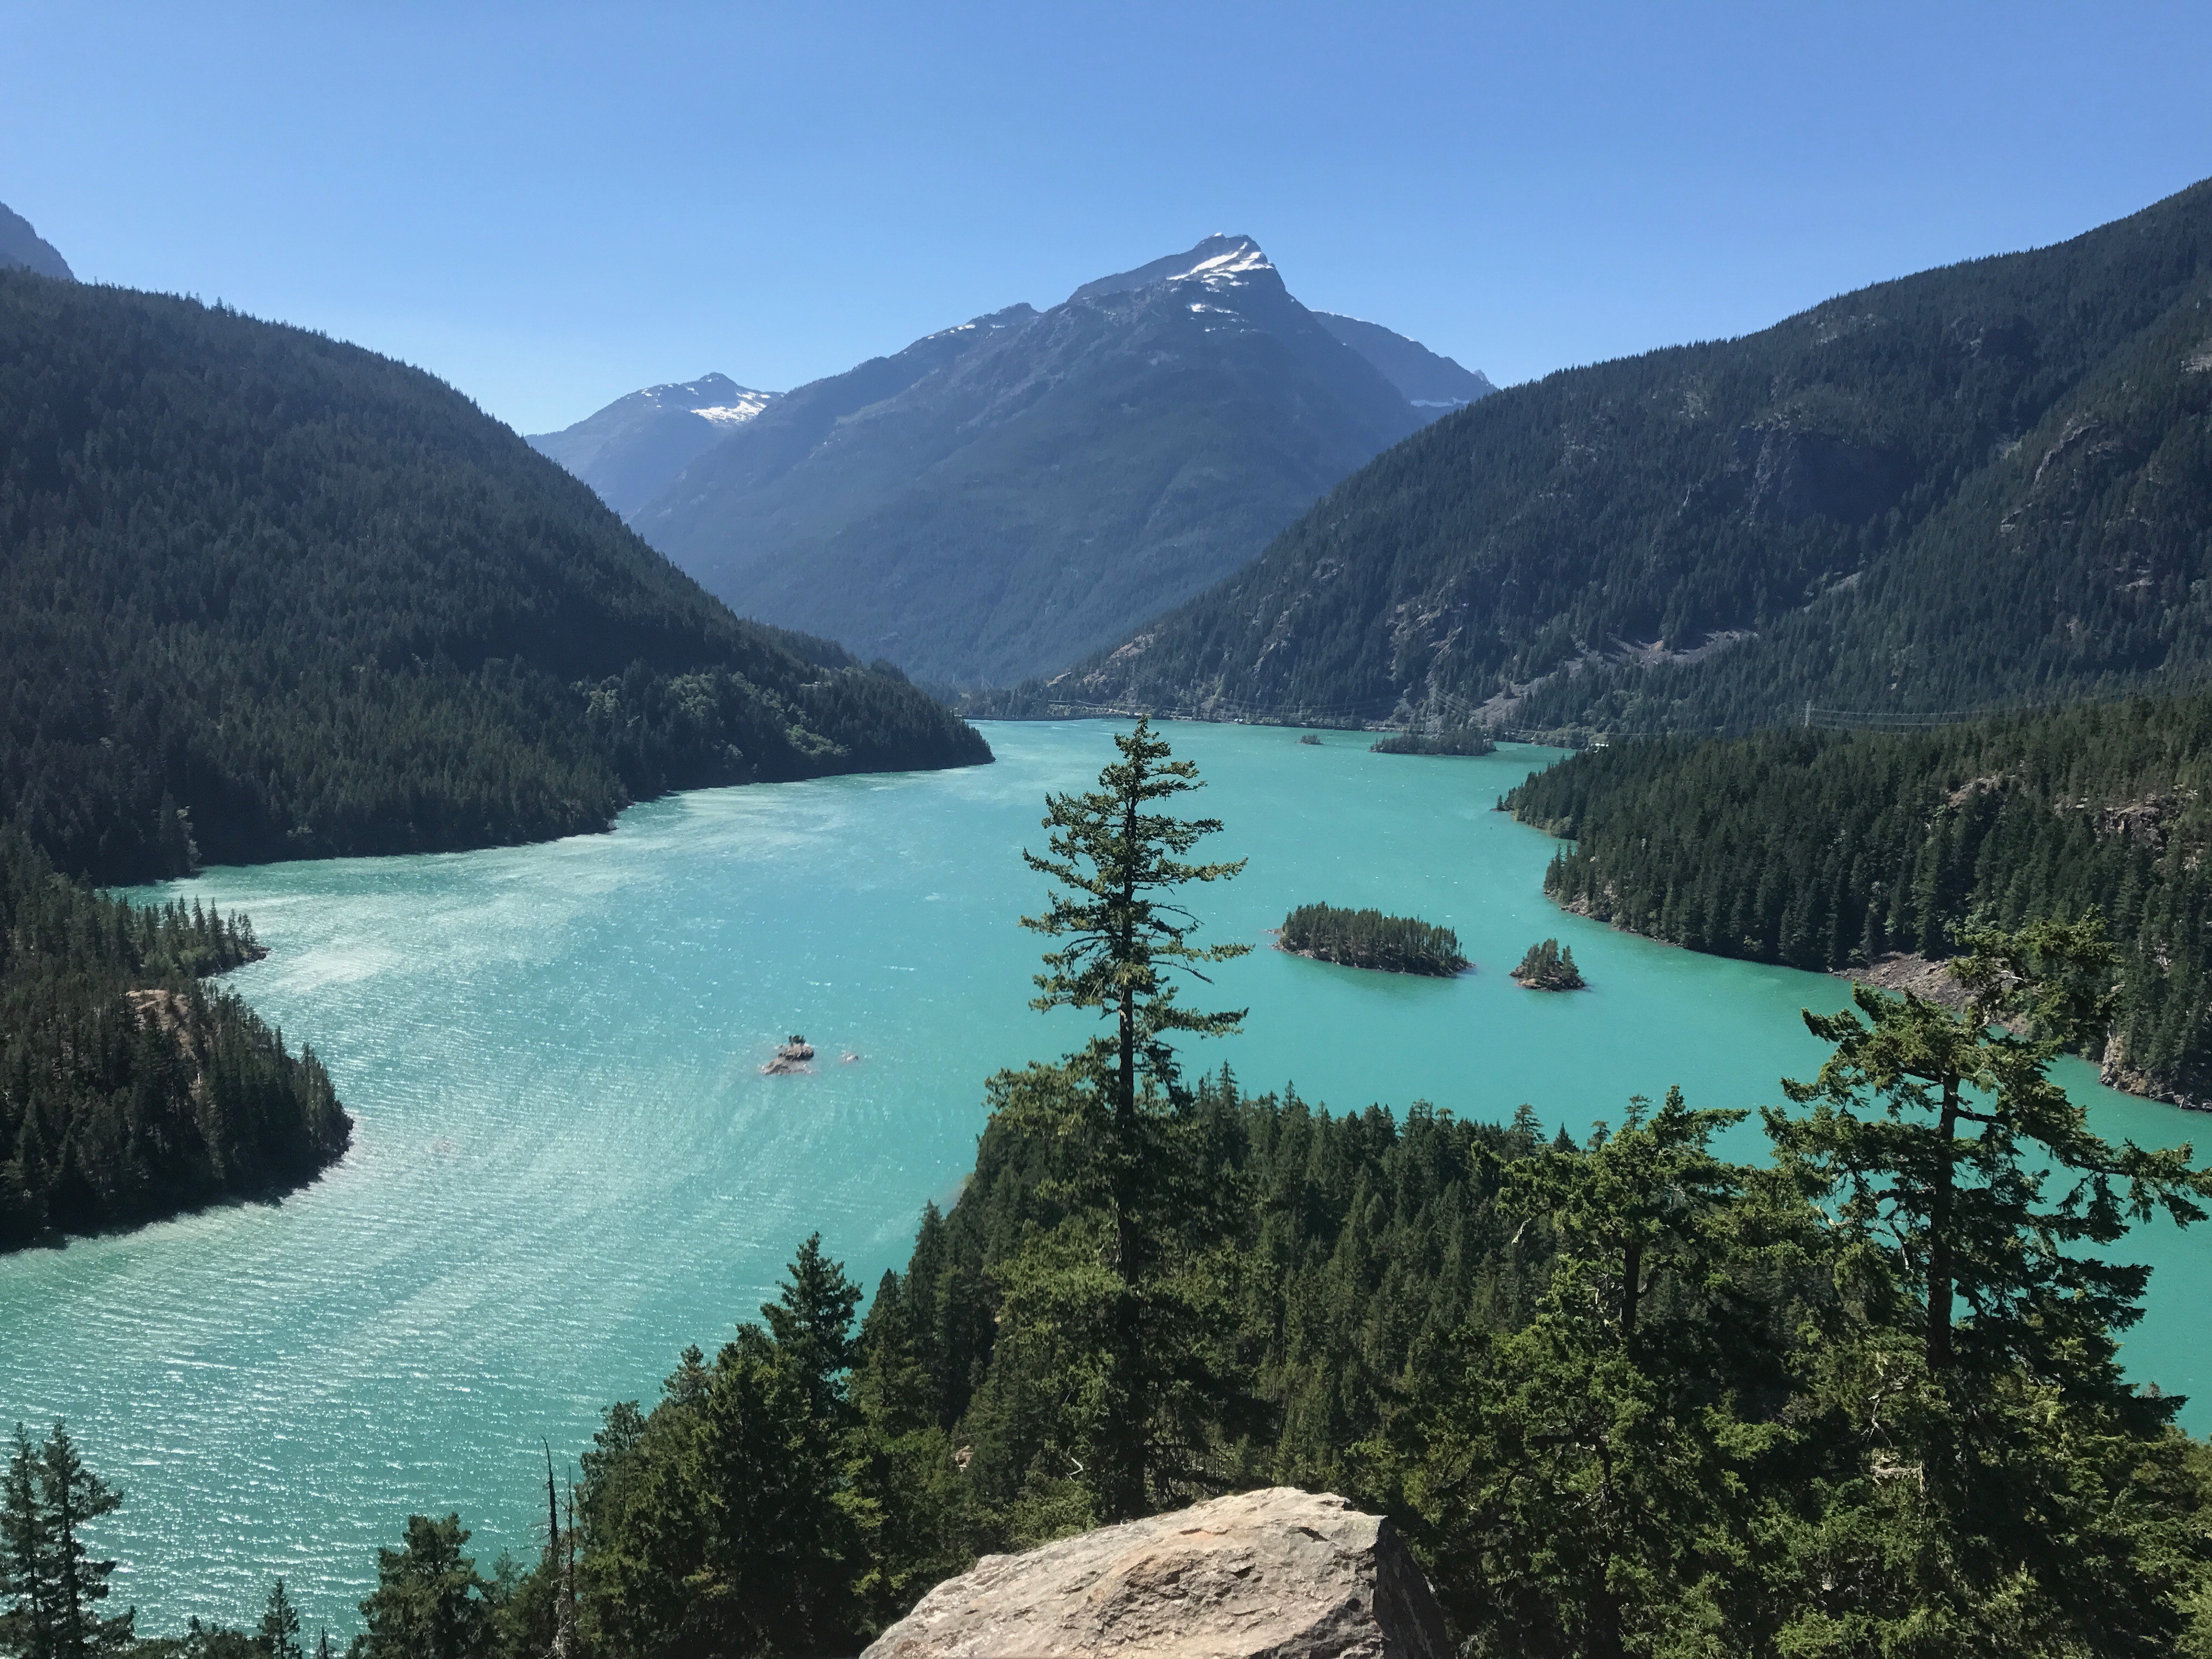 The blue water of Diablo Lake at Cascades National Park